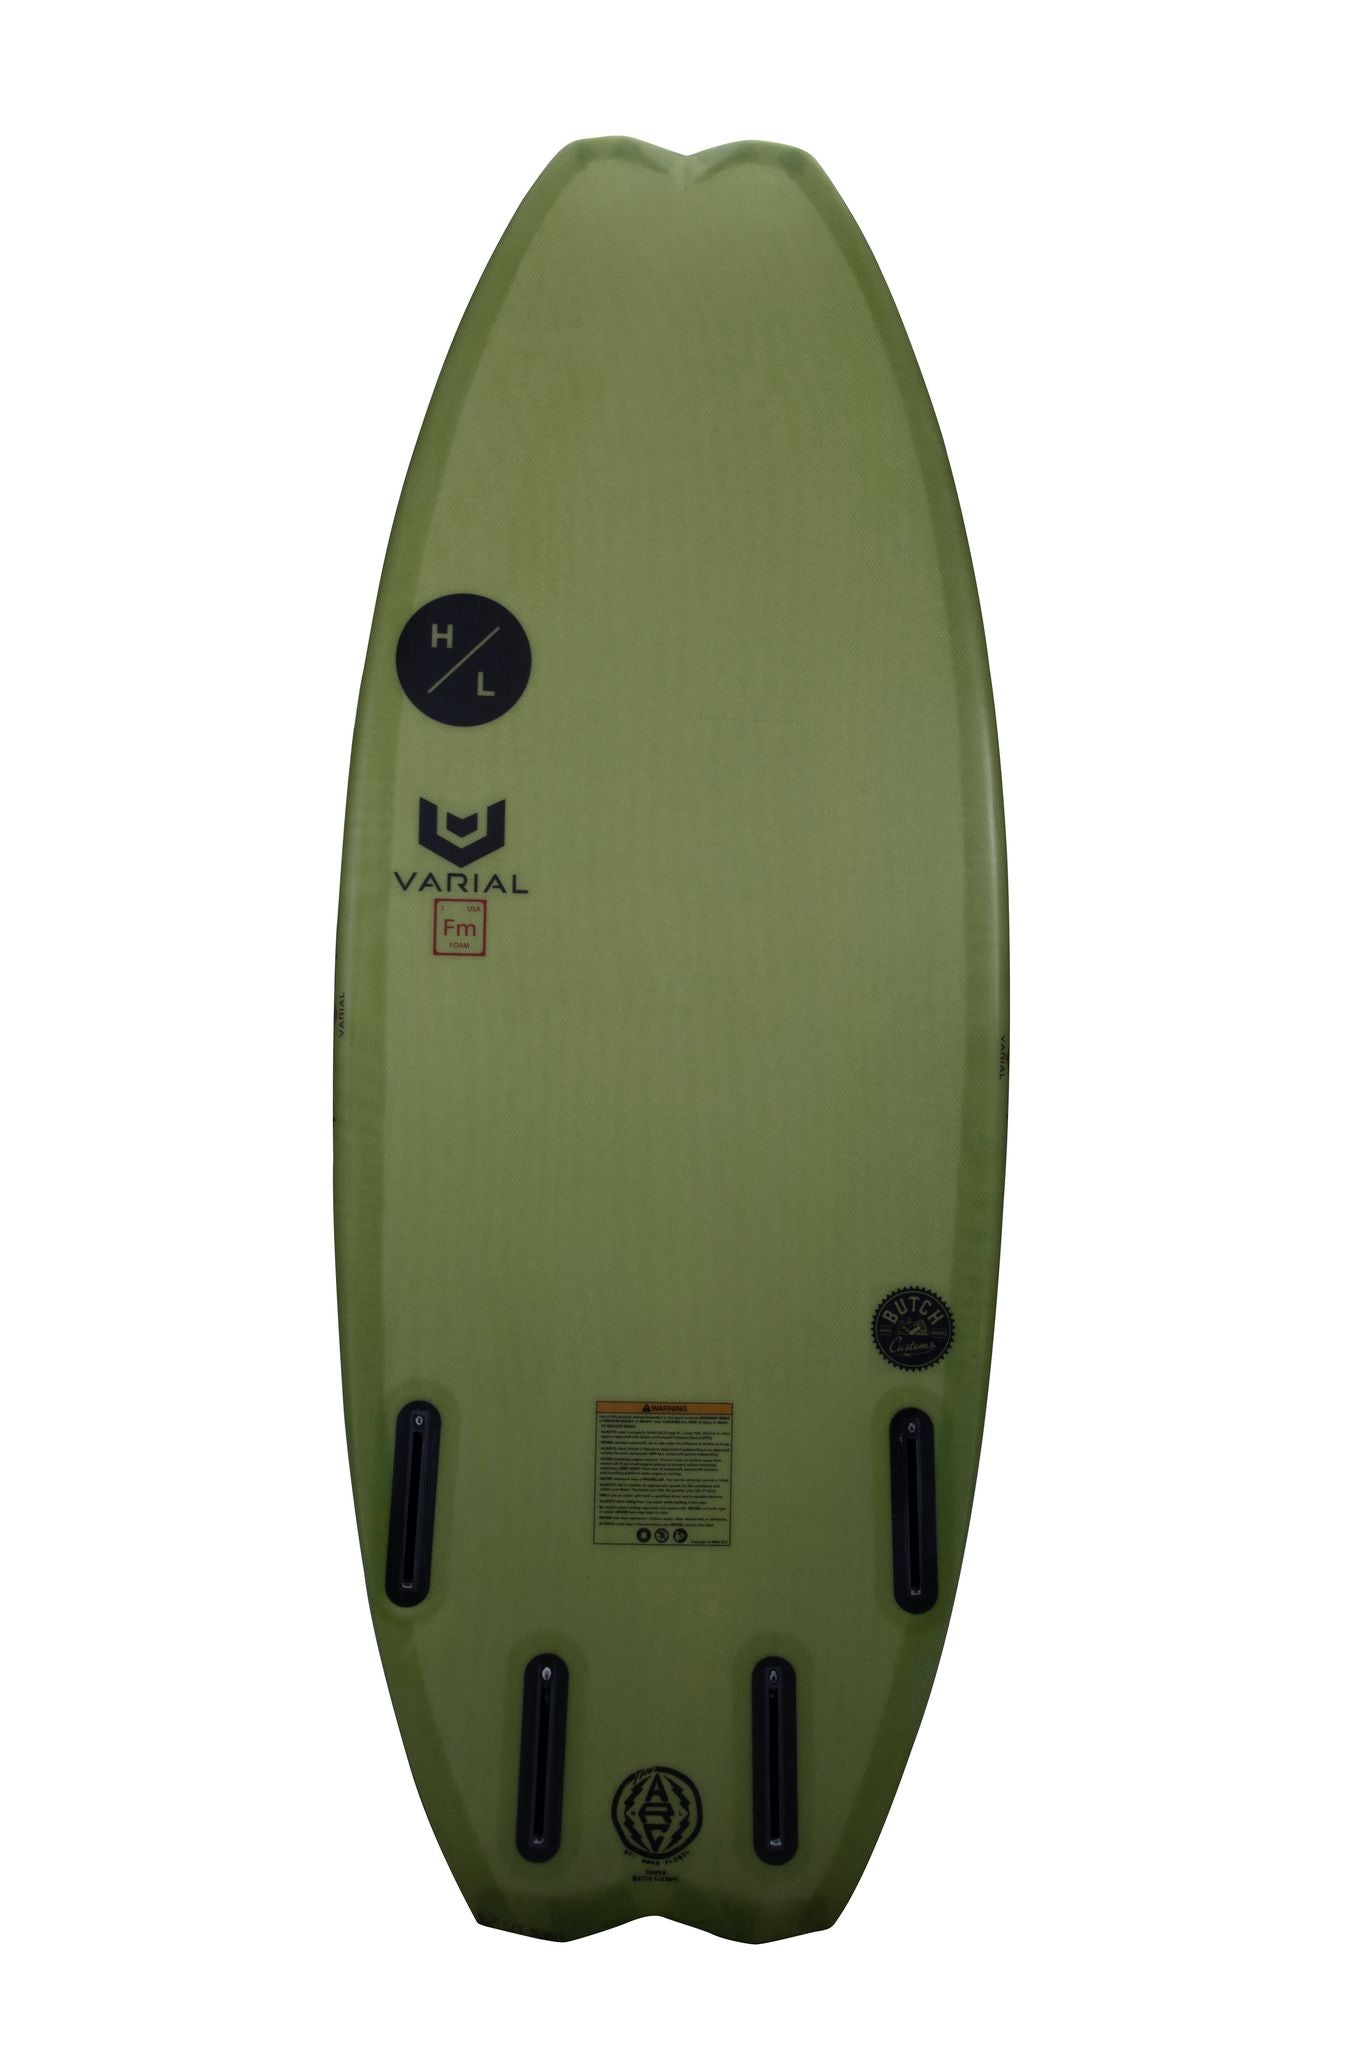 A green Hyperlite 2024 Varial ARC Wakesurf Board with a black logo on it, featuring Varial Surf Technology.